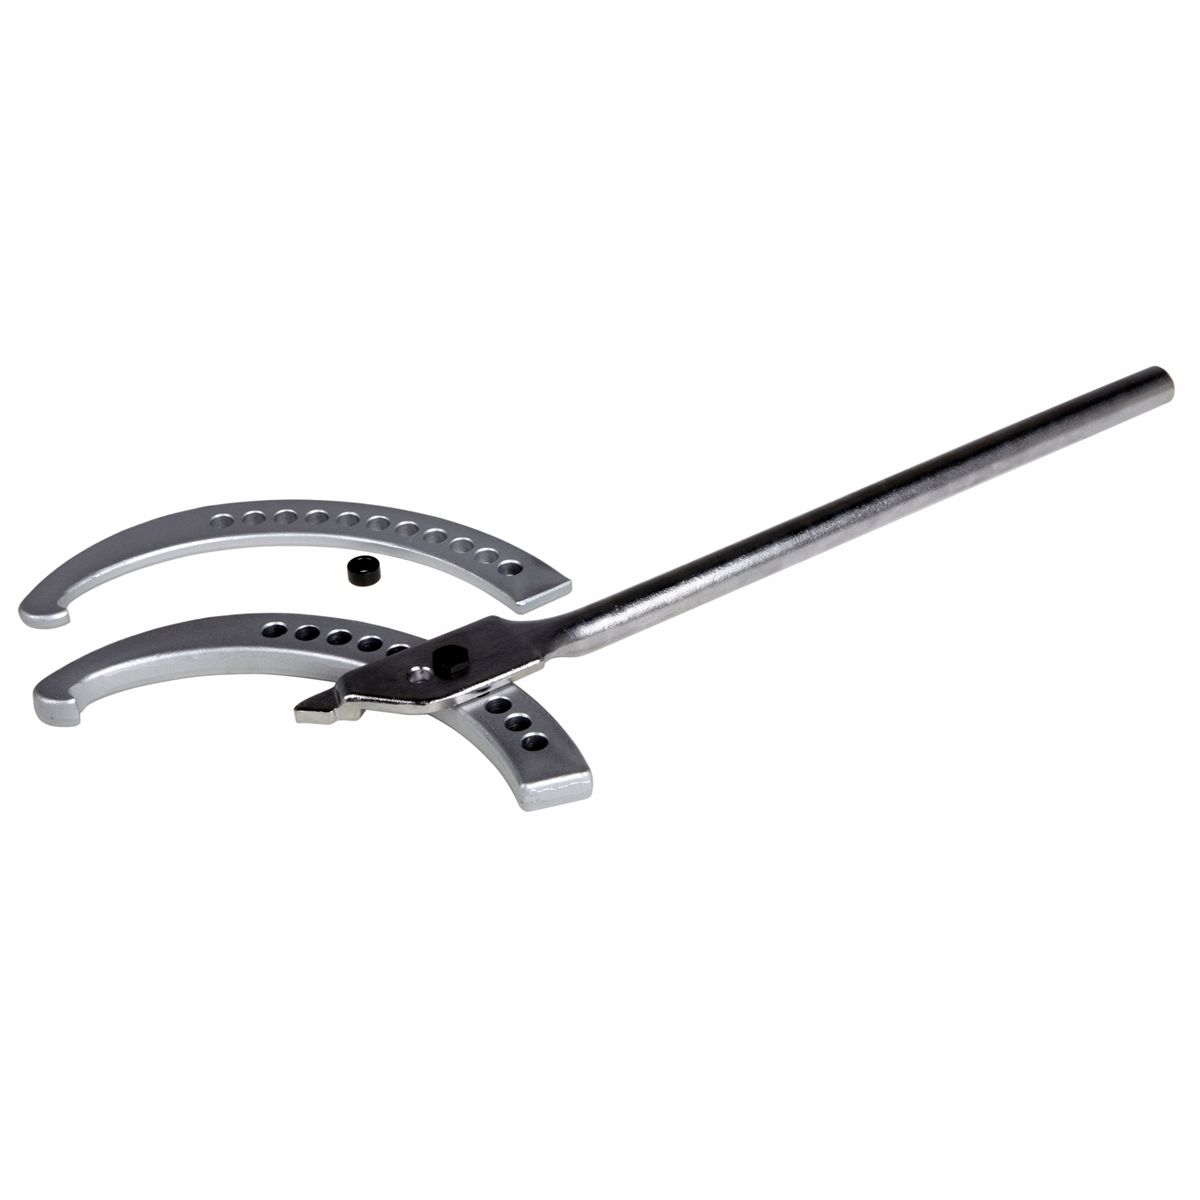 Spanner Wrenches - WRENCHES - Hand Tools - OTC Tools - MANUFACTURERS